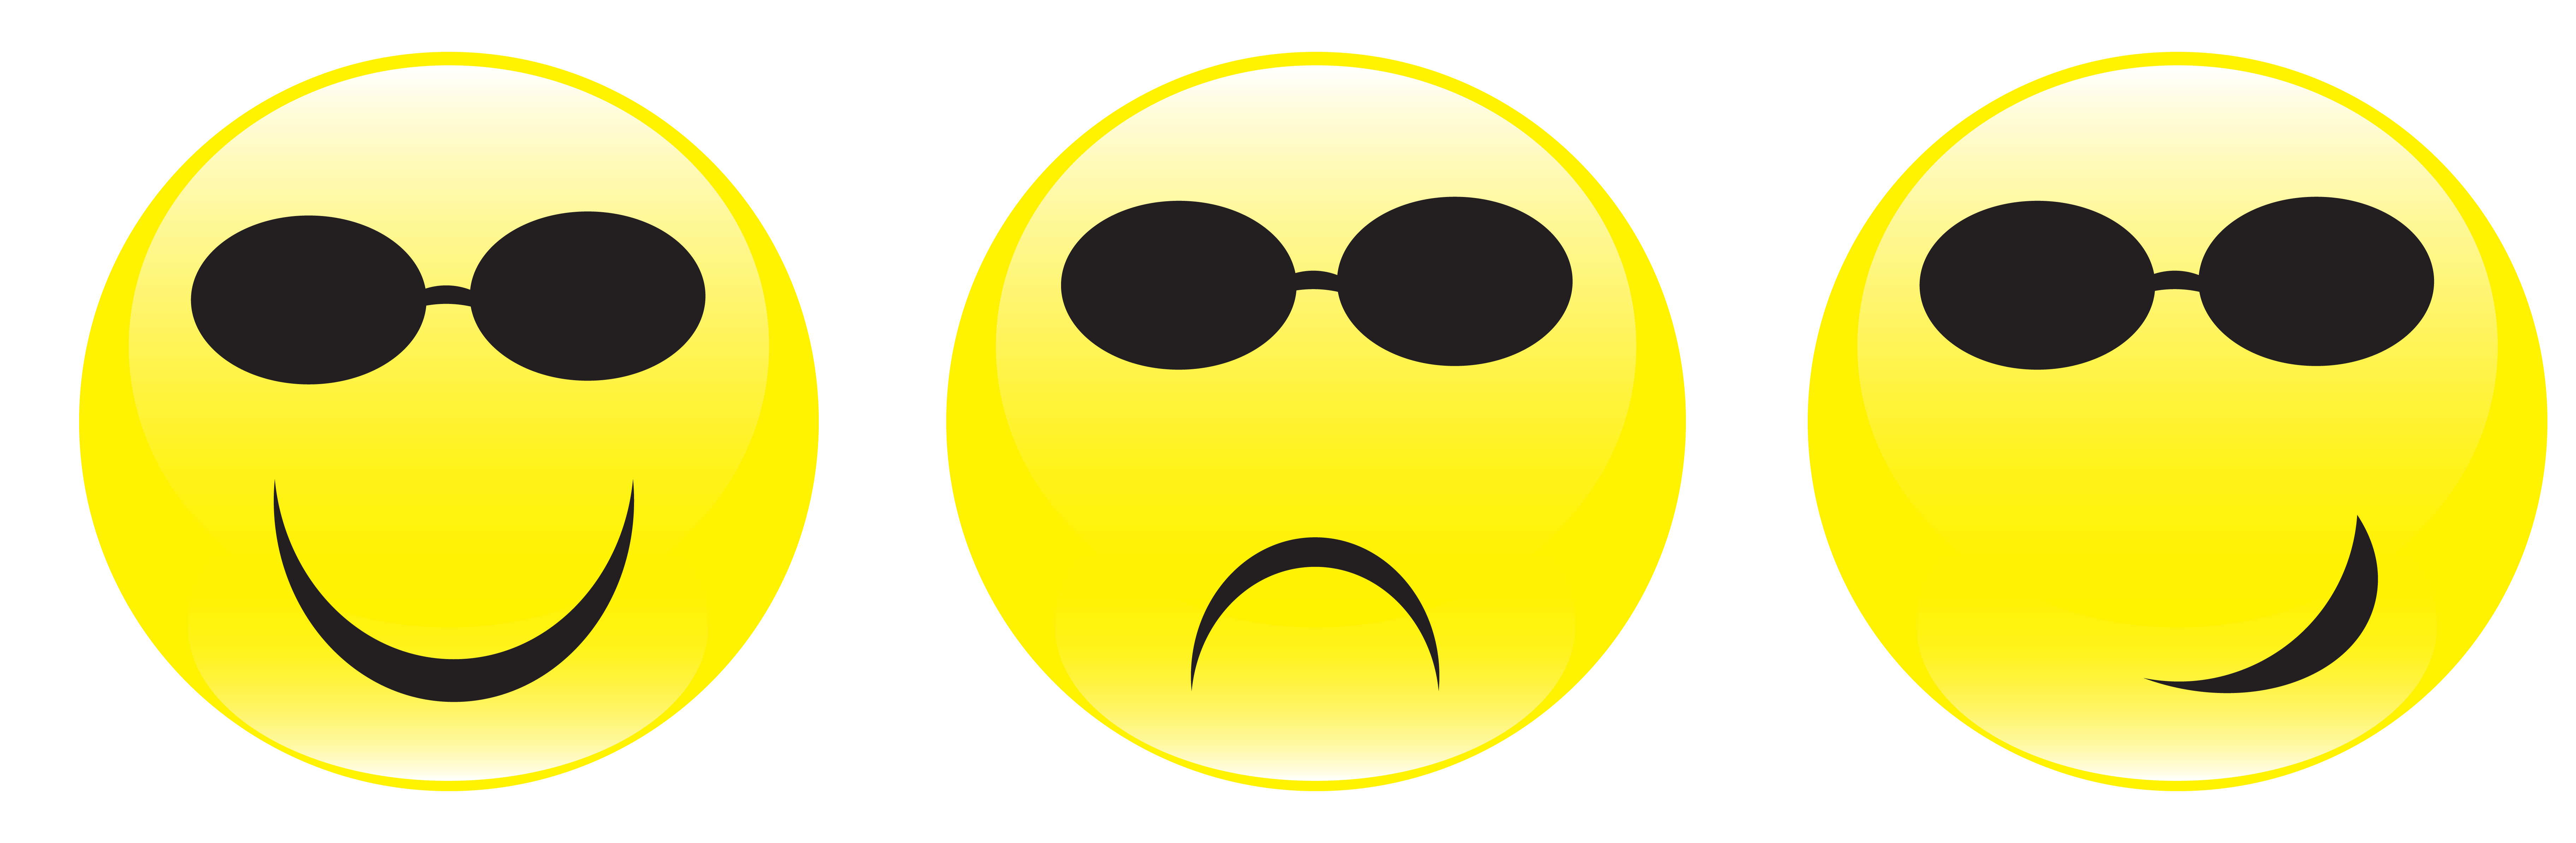 Sad Face And Happy Face Together - ClipArt Best